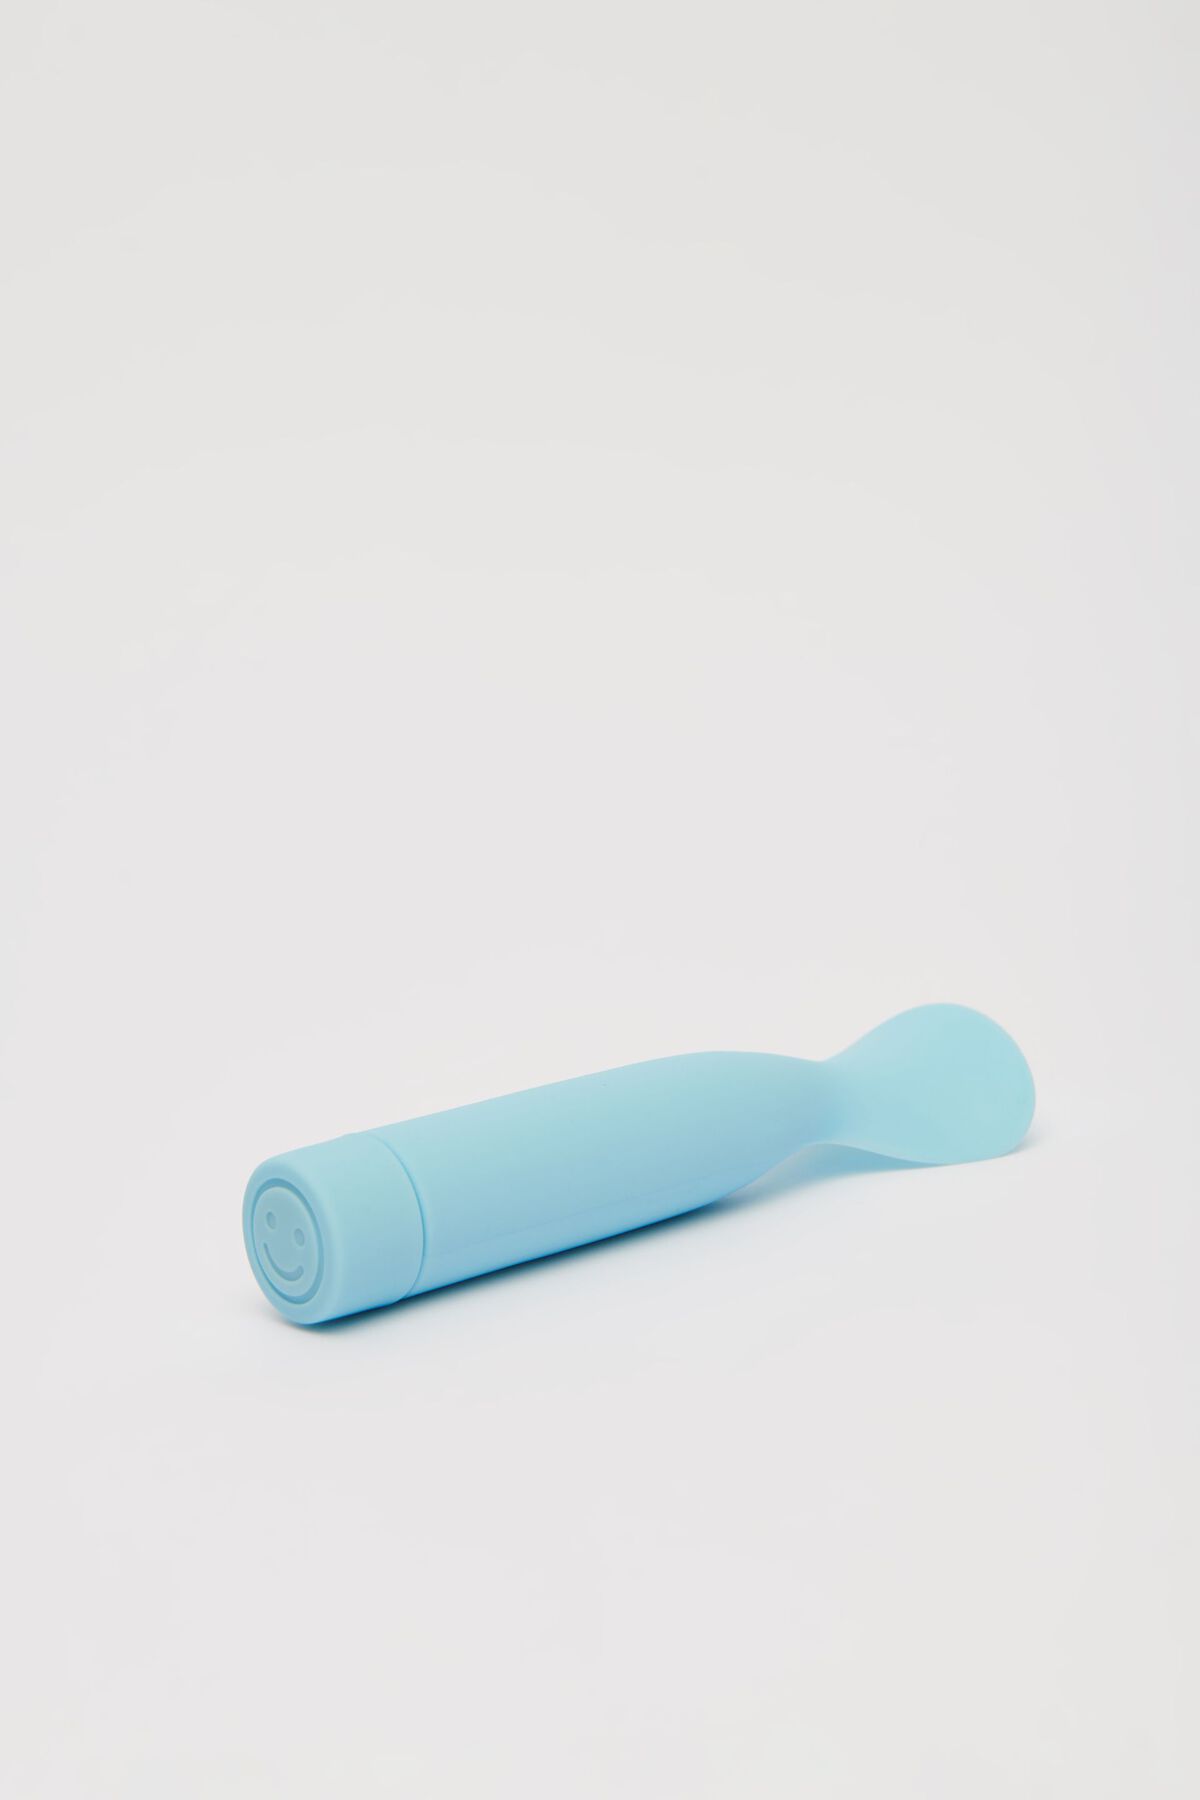 Garage SMILE MAKERS | The French Lover Vibrator. 1